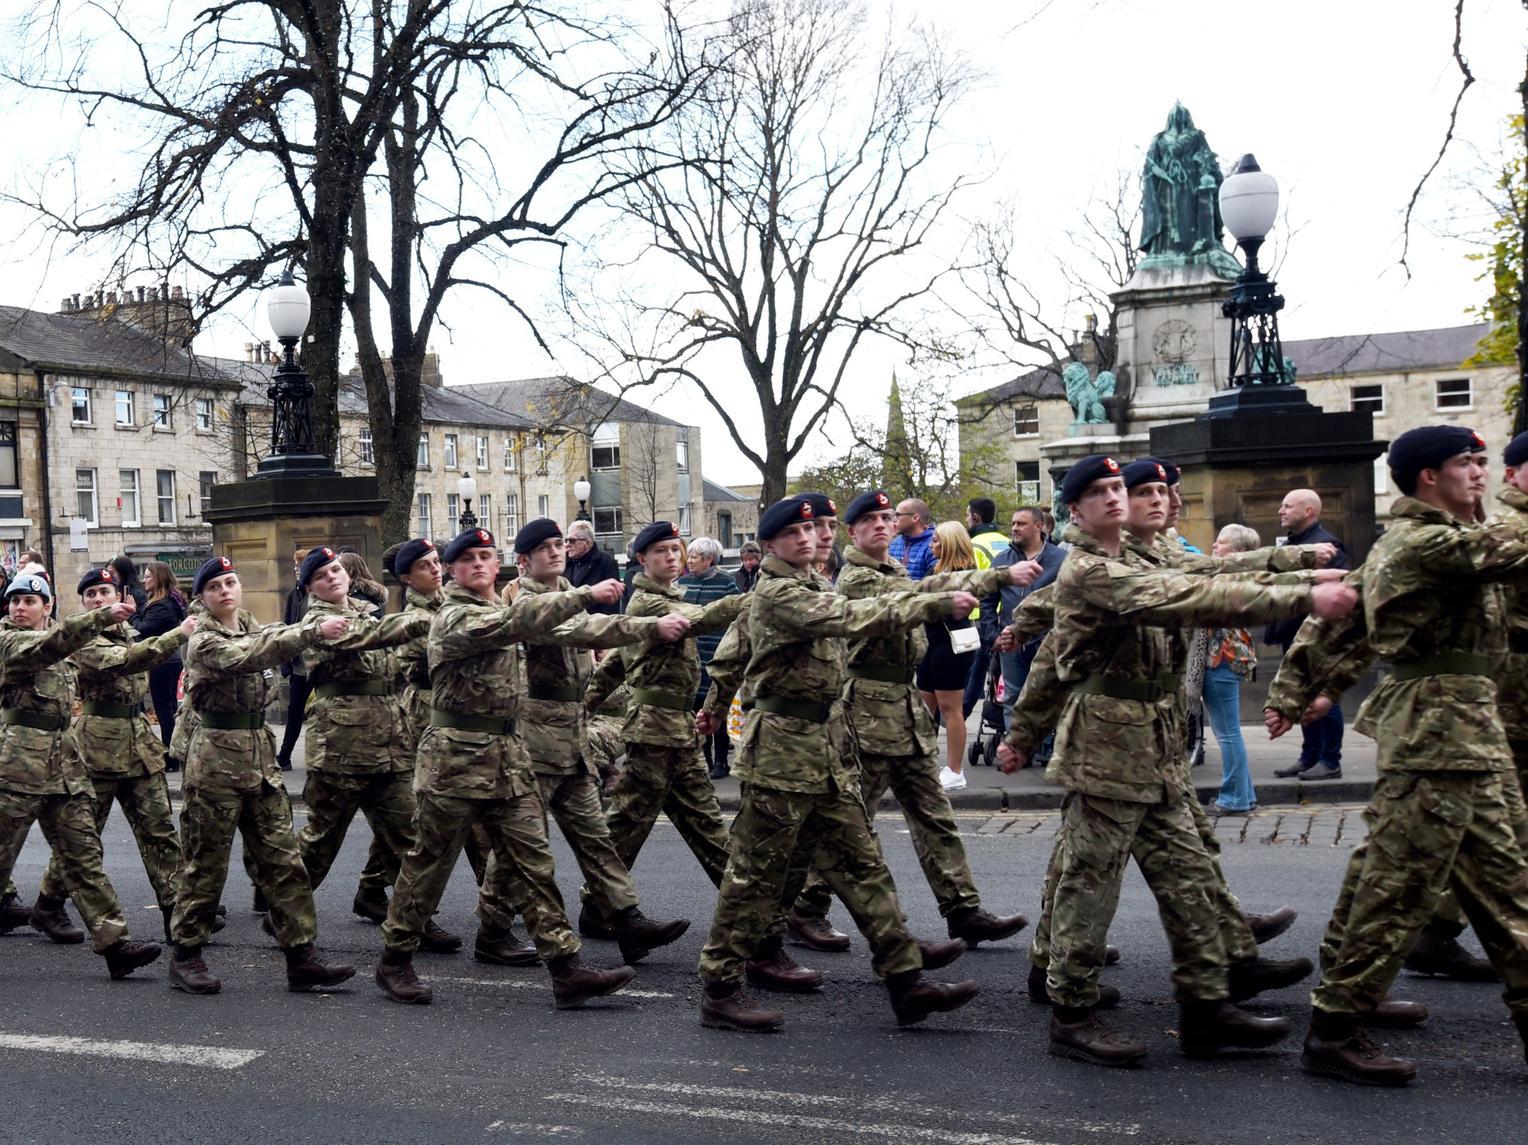 A parade past Lancaster Town Hall to end the annual Remembrance Day service and commemorations in Lancaster city centre. Photo by Michelle Adamson.